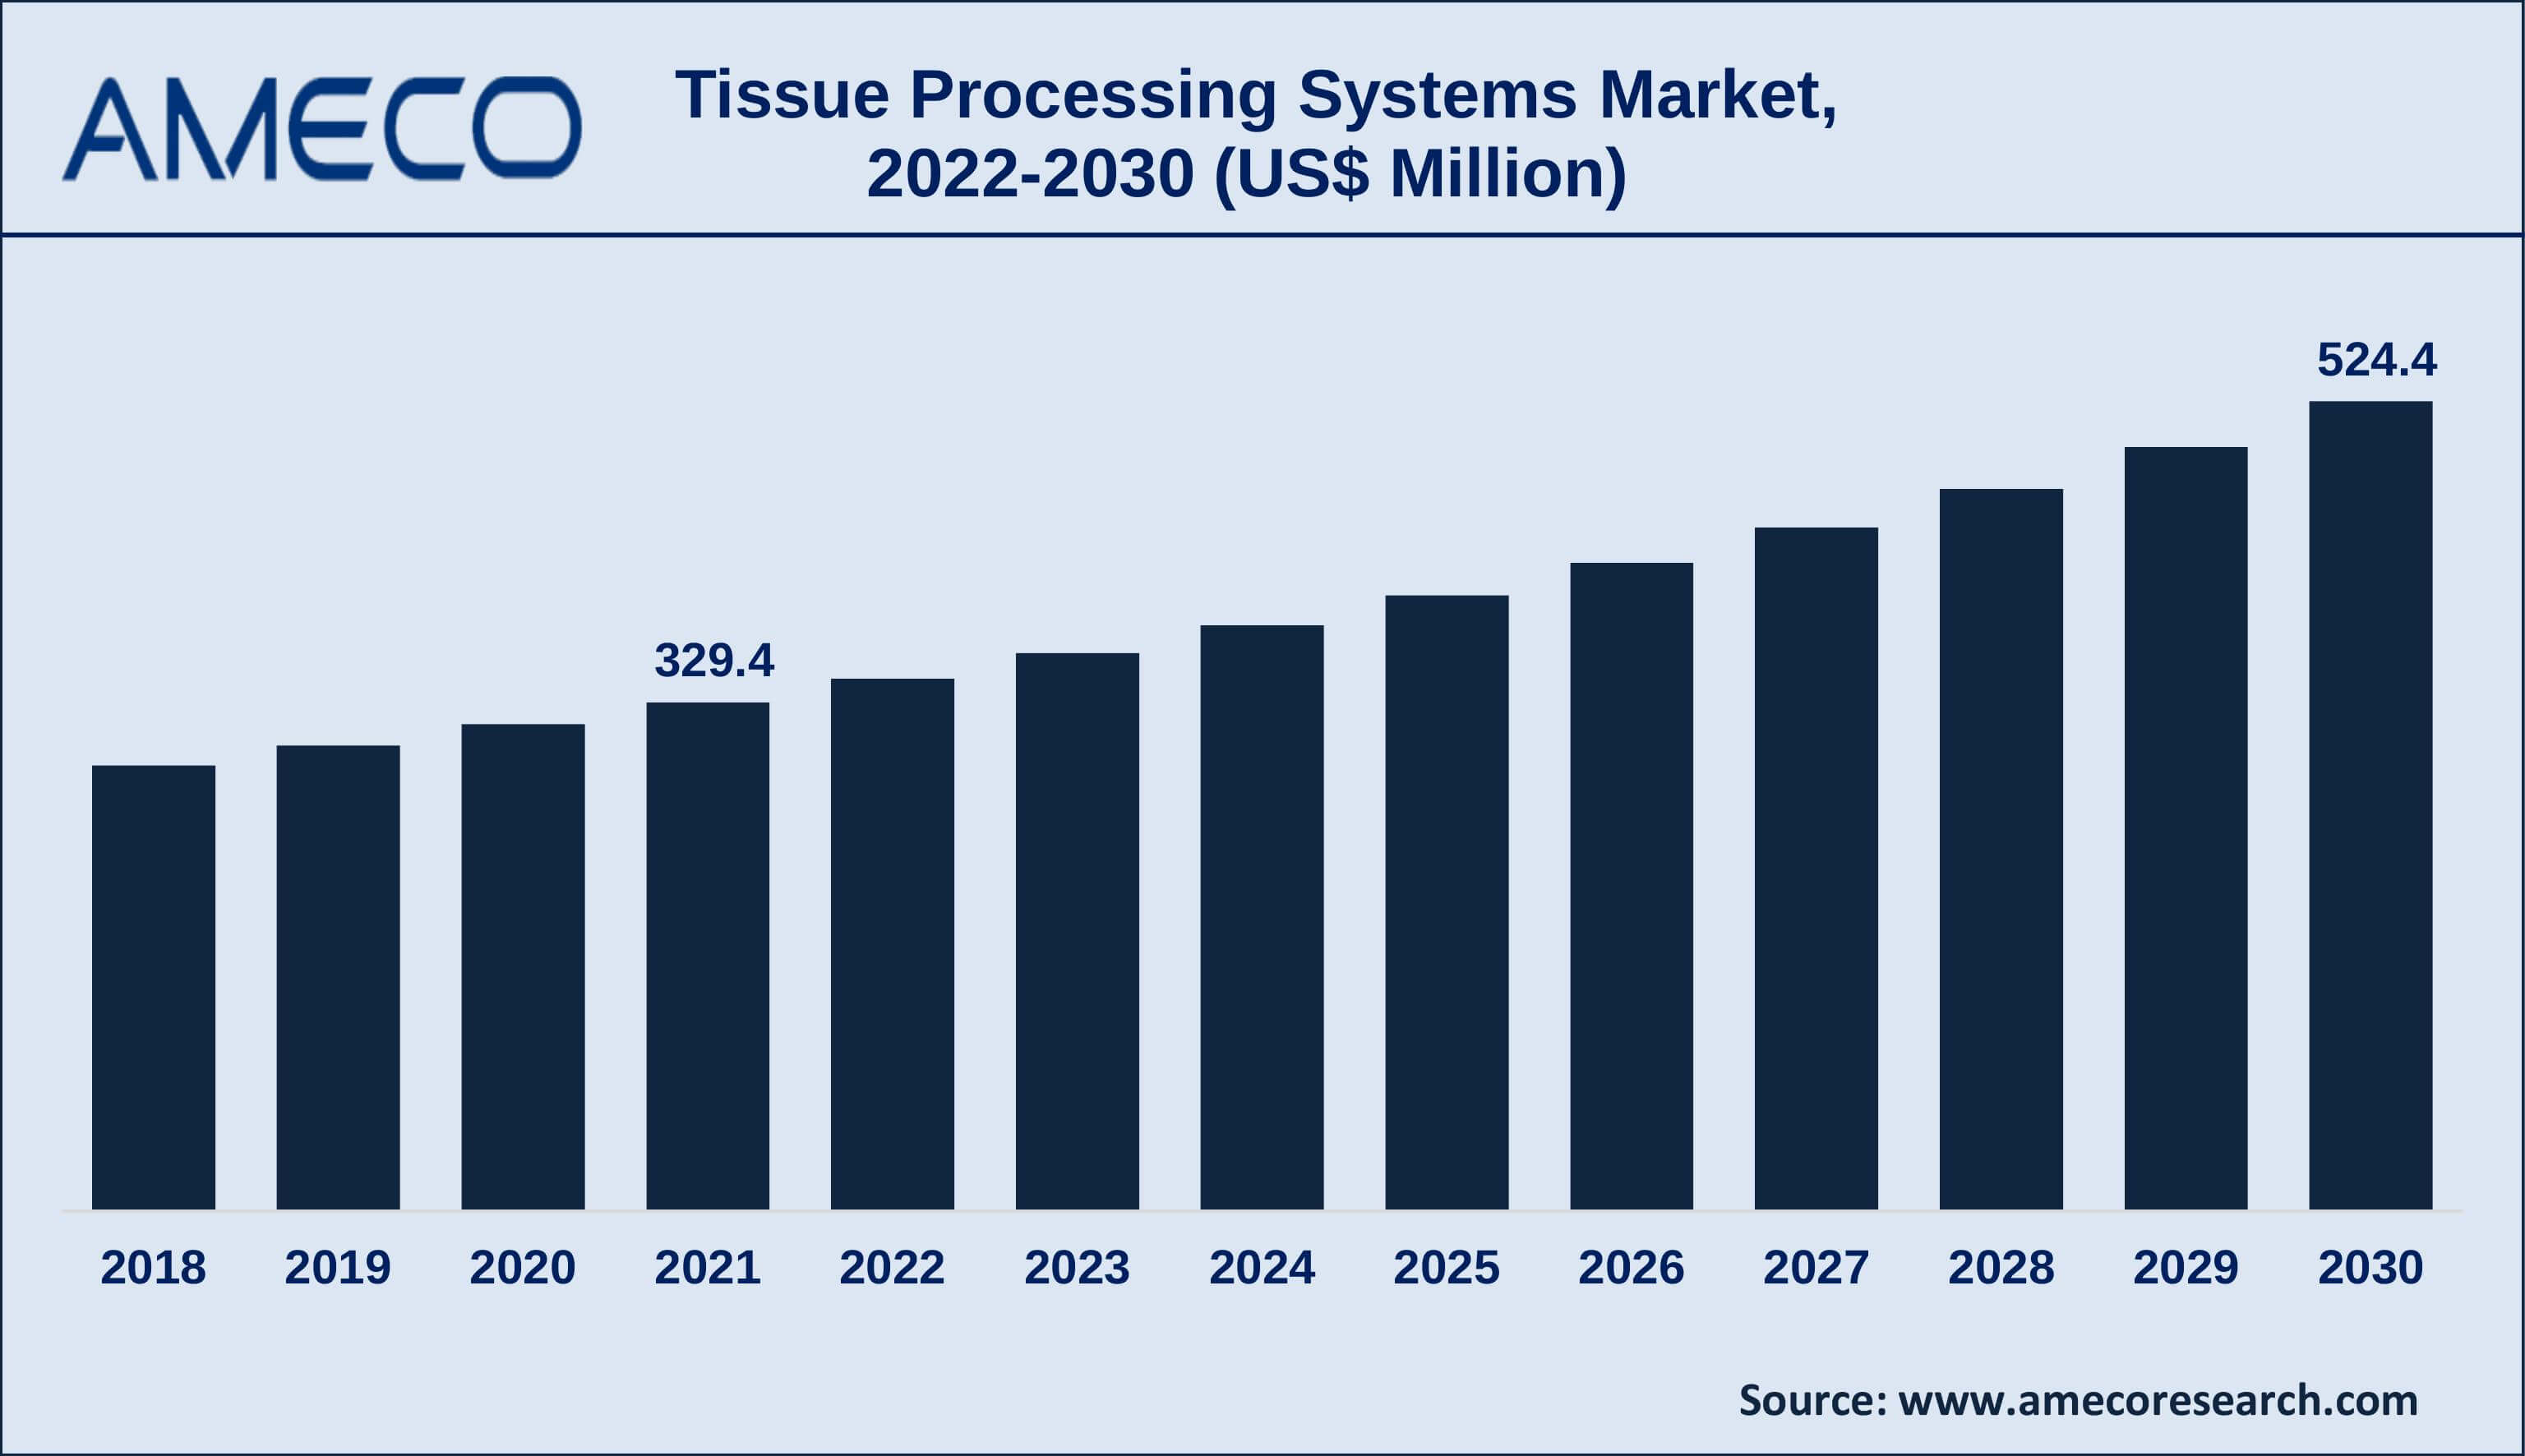 Tissue Processing Systems Market Size, Share, Growth, Trends, and Forecast 2022-2030